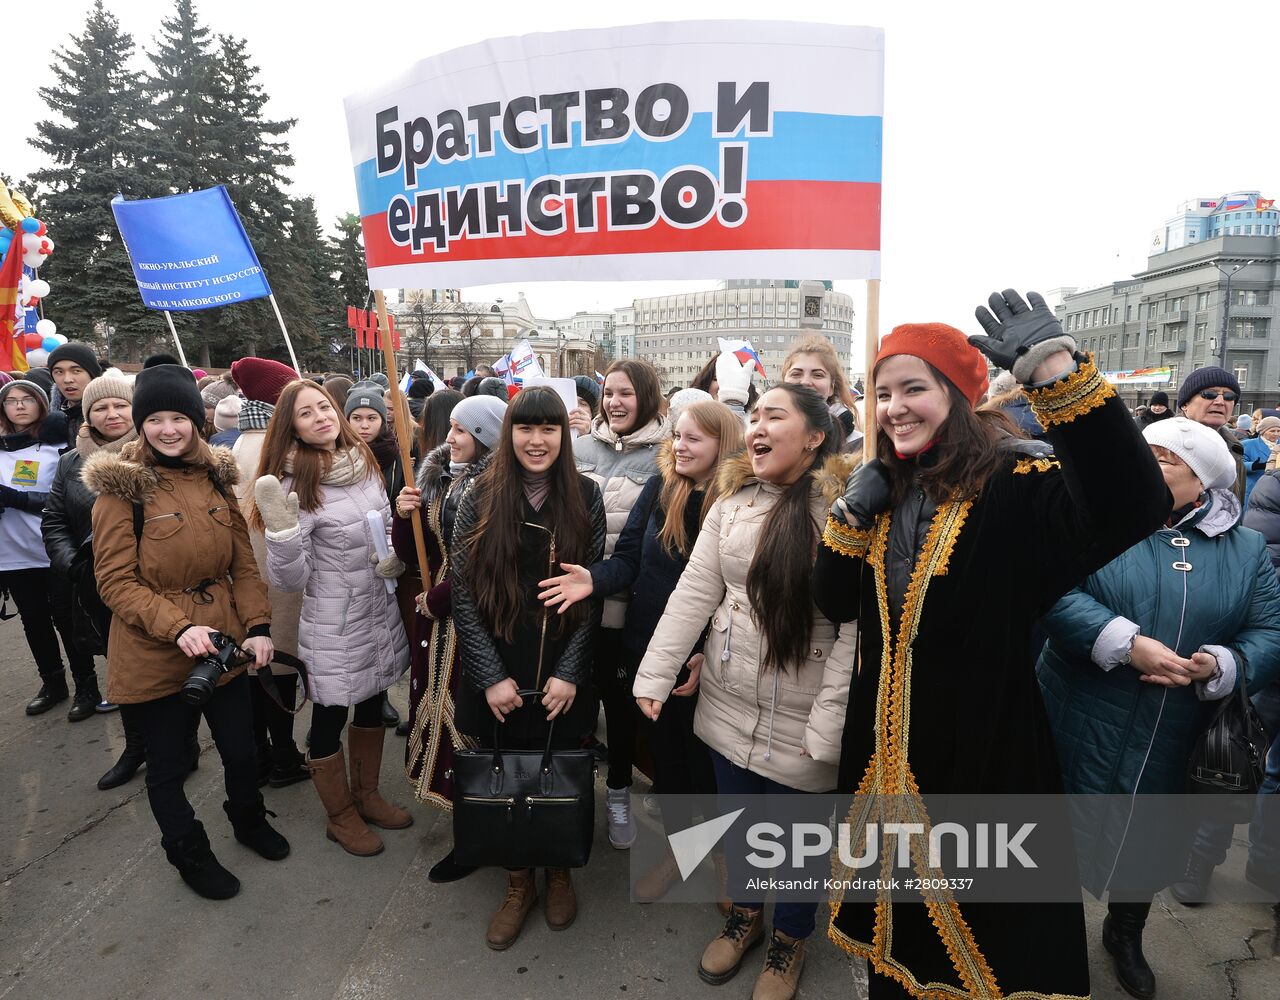 Celebrating Day of Reunification with Russia